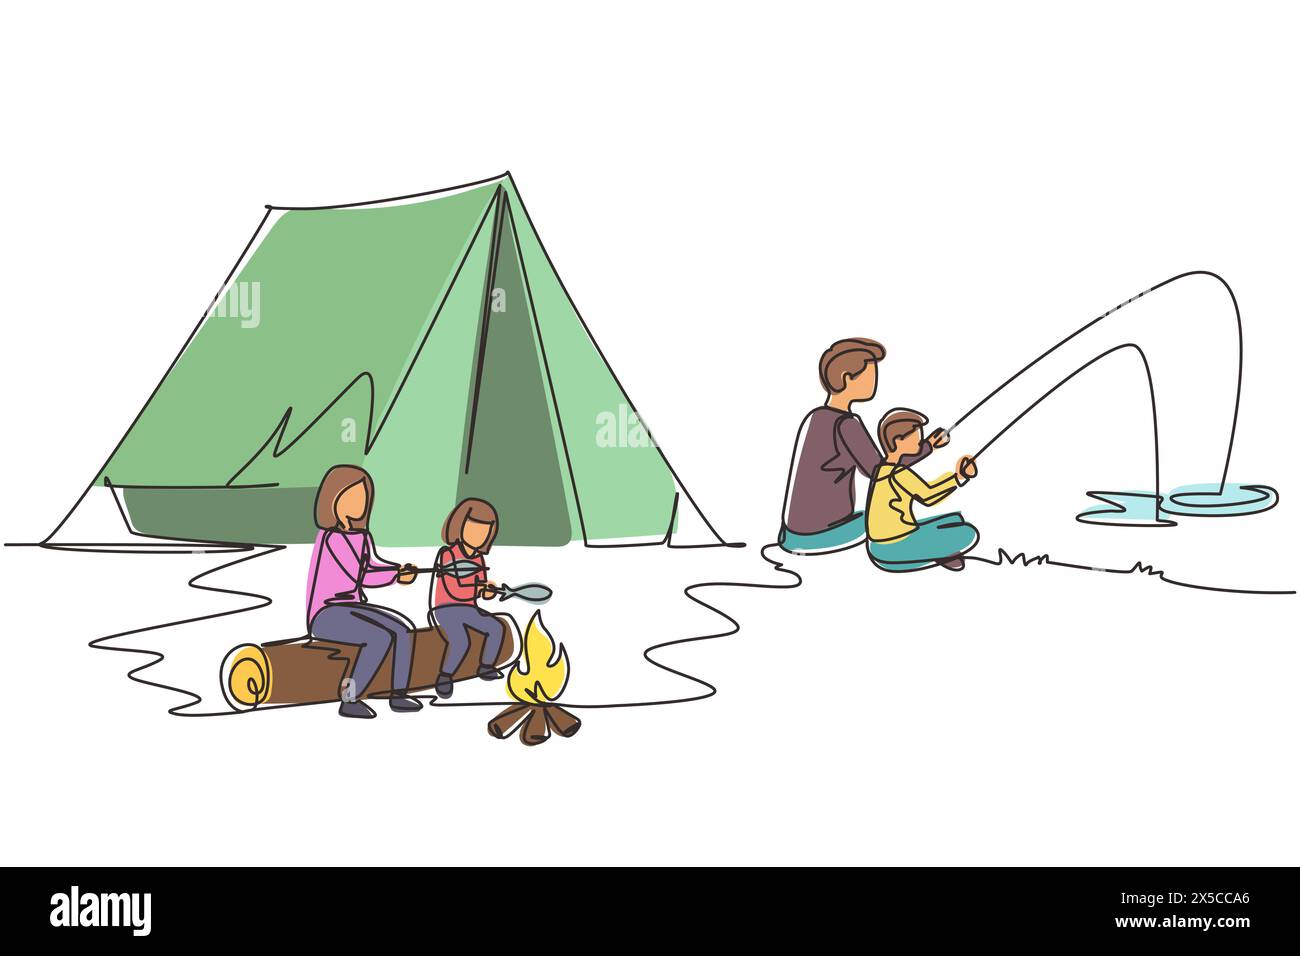 Single one line drawing happy family camping. Mother roasting fish with daughter. Father catching fish with son. Summer camper travel vacation concept Stock Vector